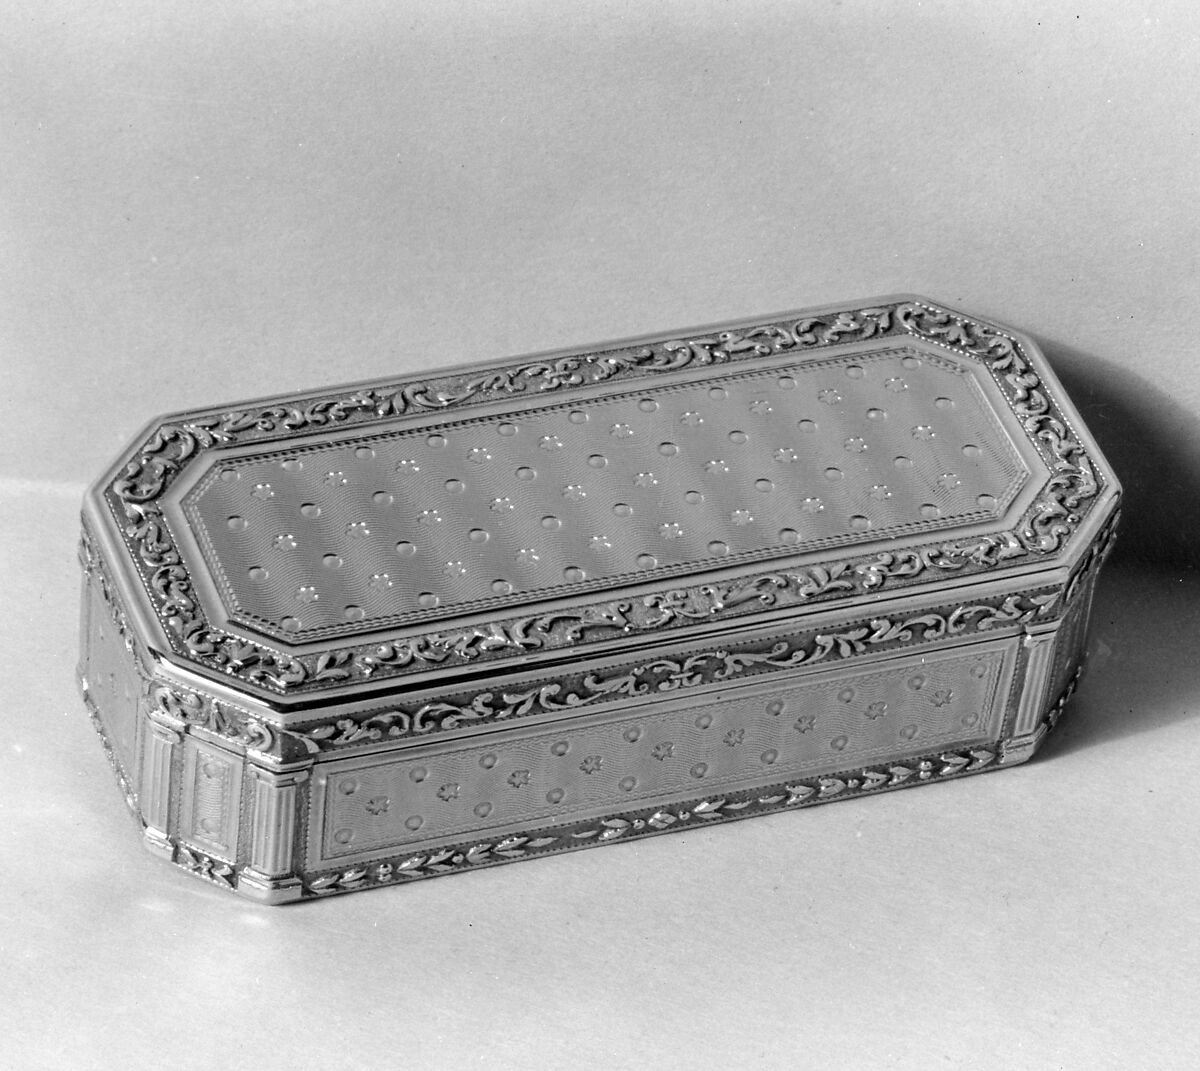 Box, Possibly by Jacques François Varin (active Paris, master 1758, active 1790), Gold, French, Paris 